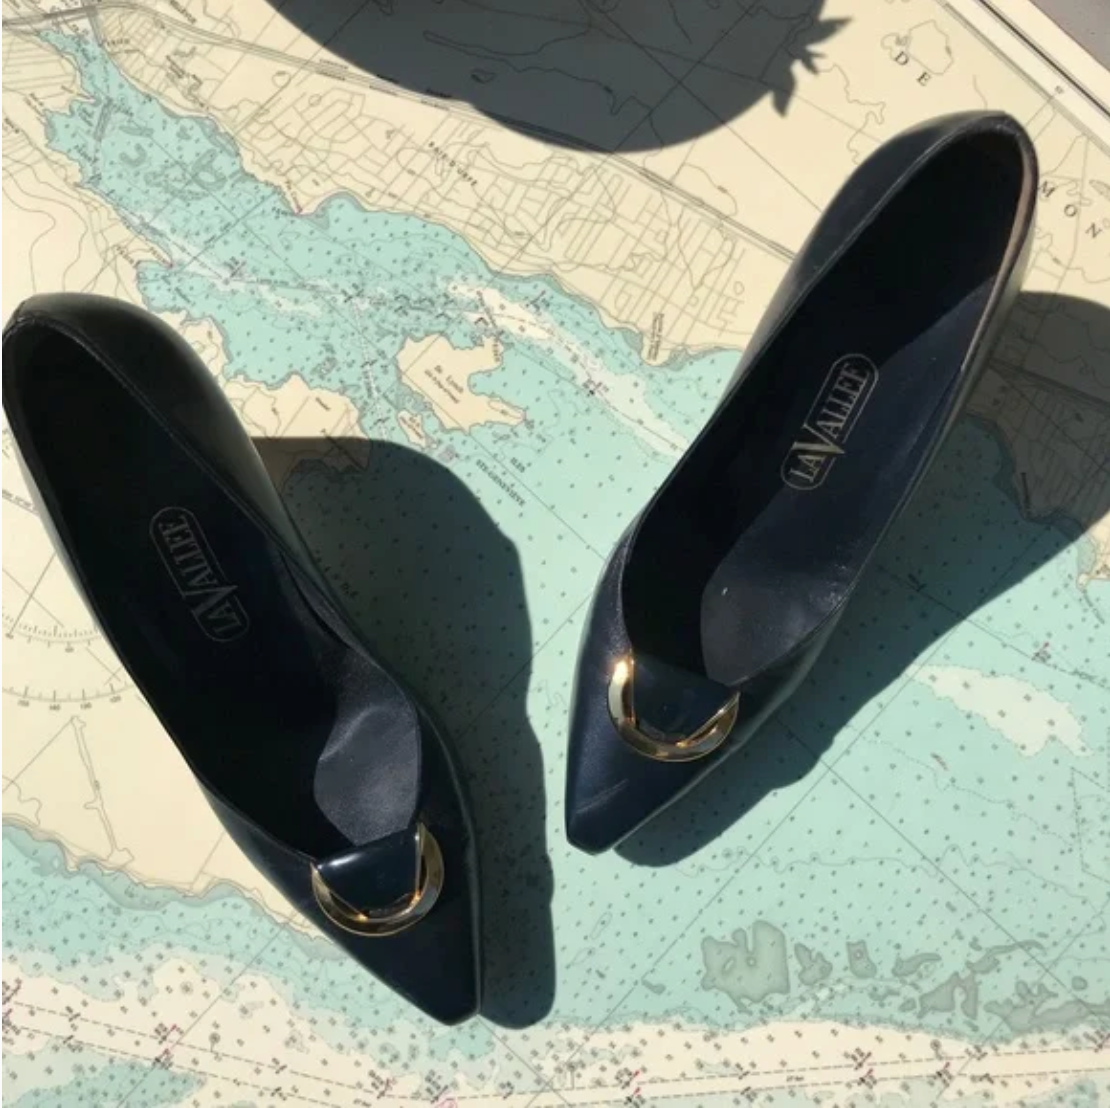 Vintage LaVallee Navy and Gold Leather Pumps